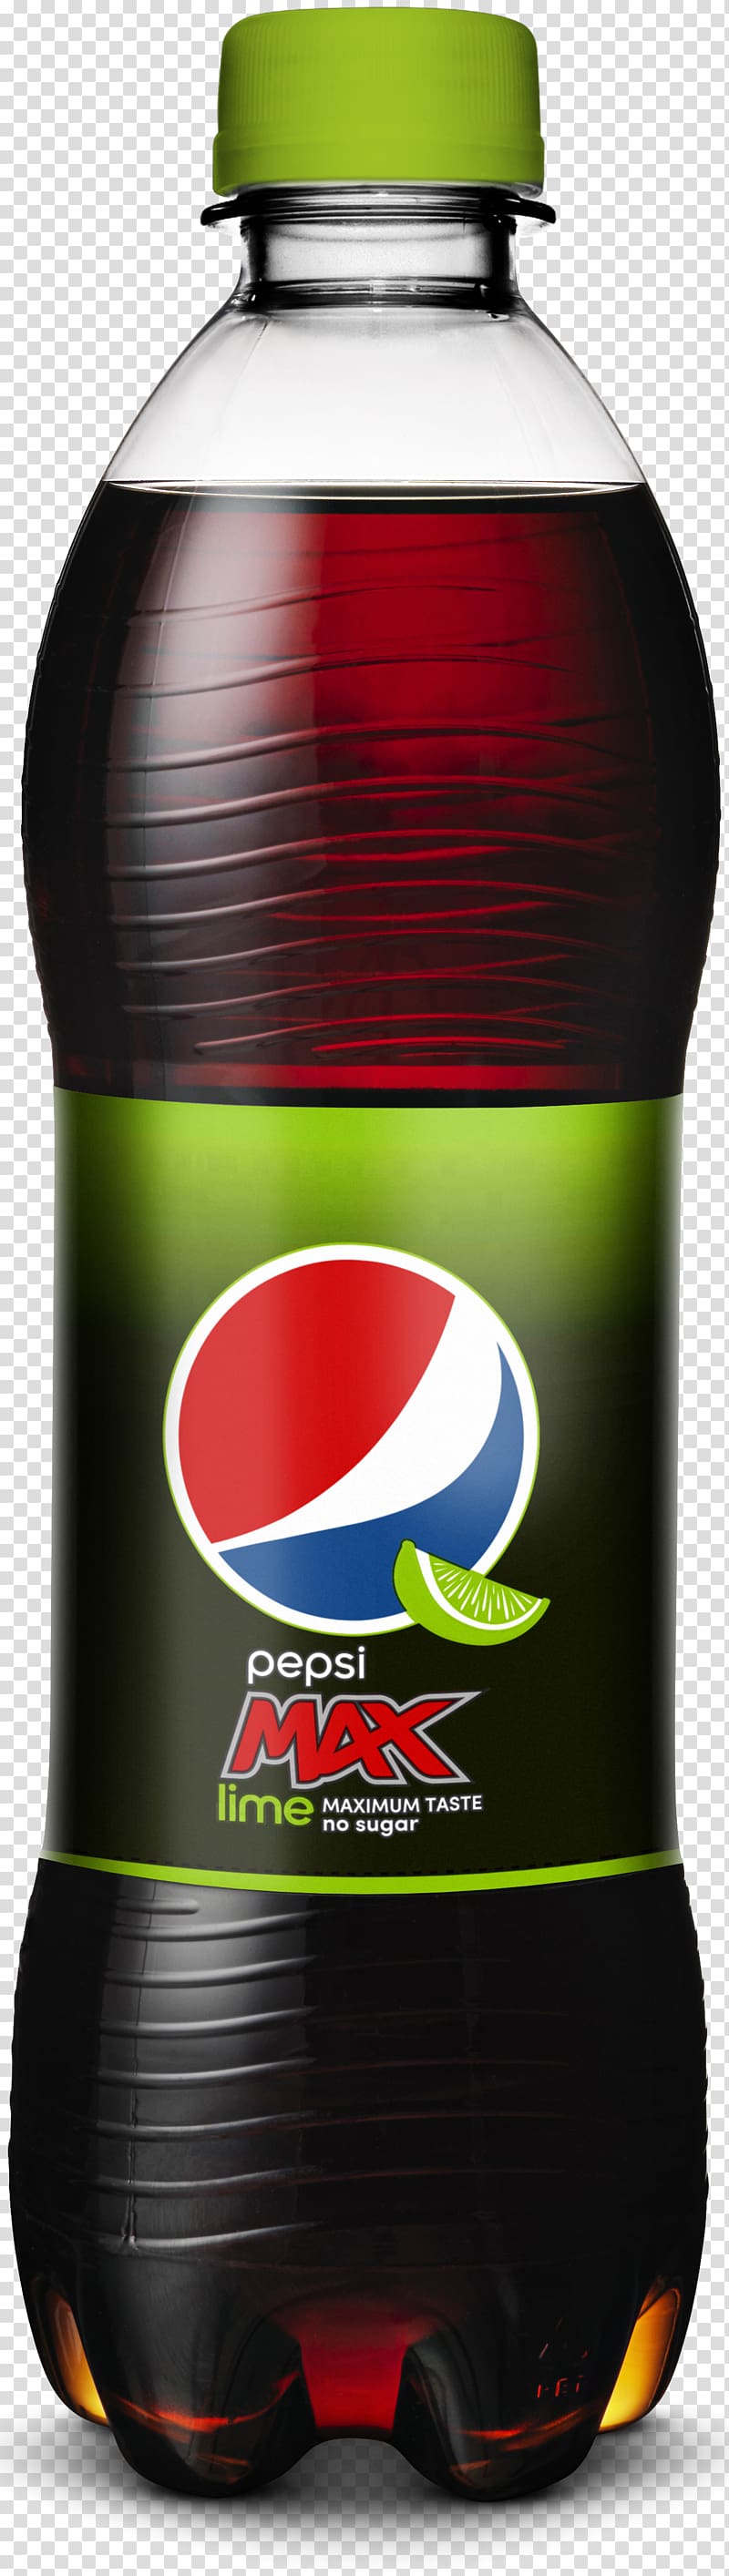 Pepsi Max Fizzy Drinks Lemon-lime drink Iced tea, Pepsi Max transparent background PNG clipart